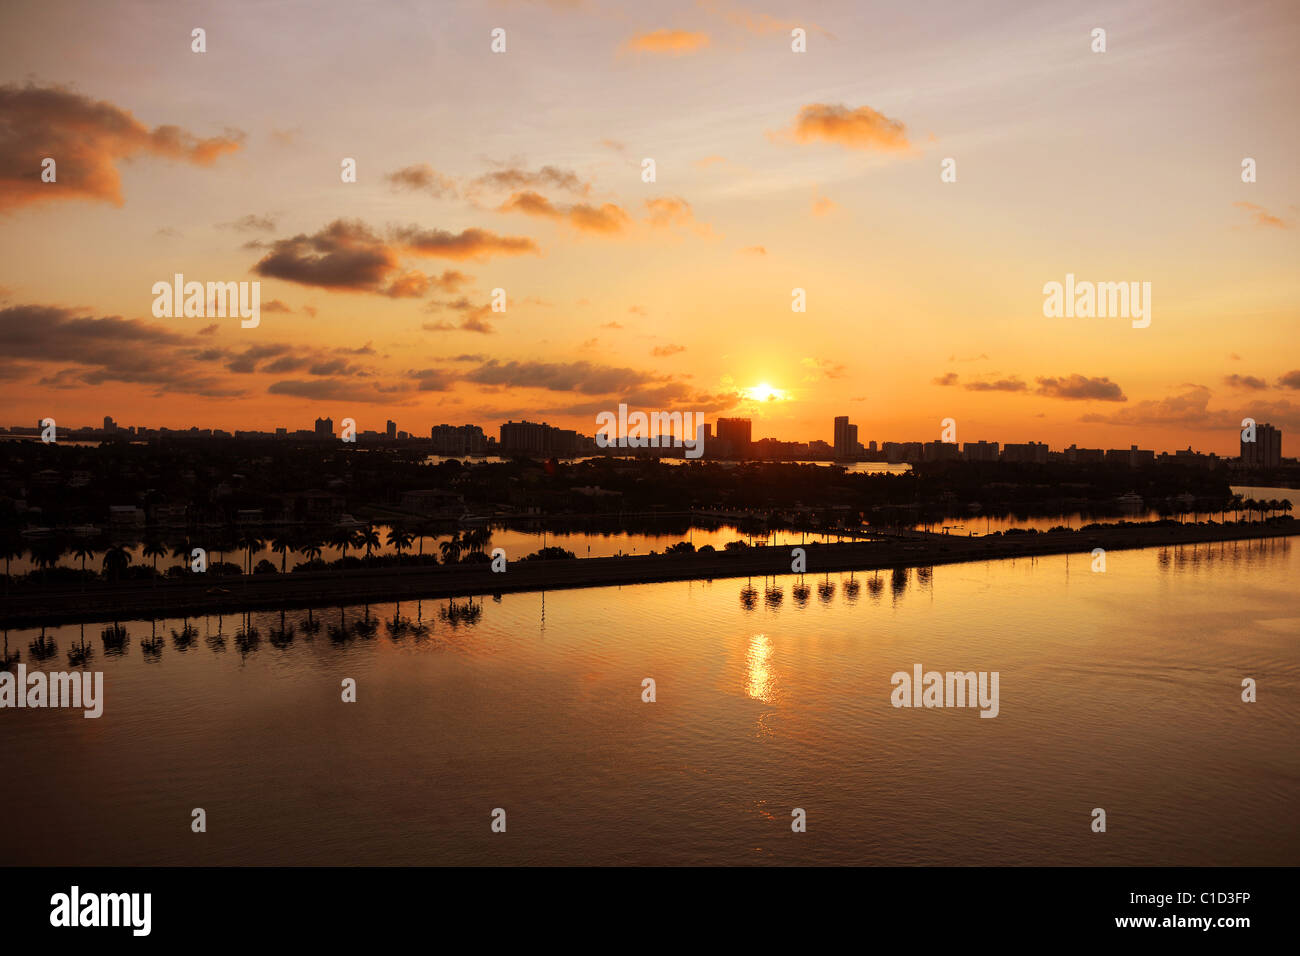 Miami at daybreak with view of canals Stock Photo